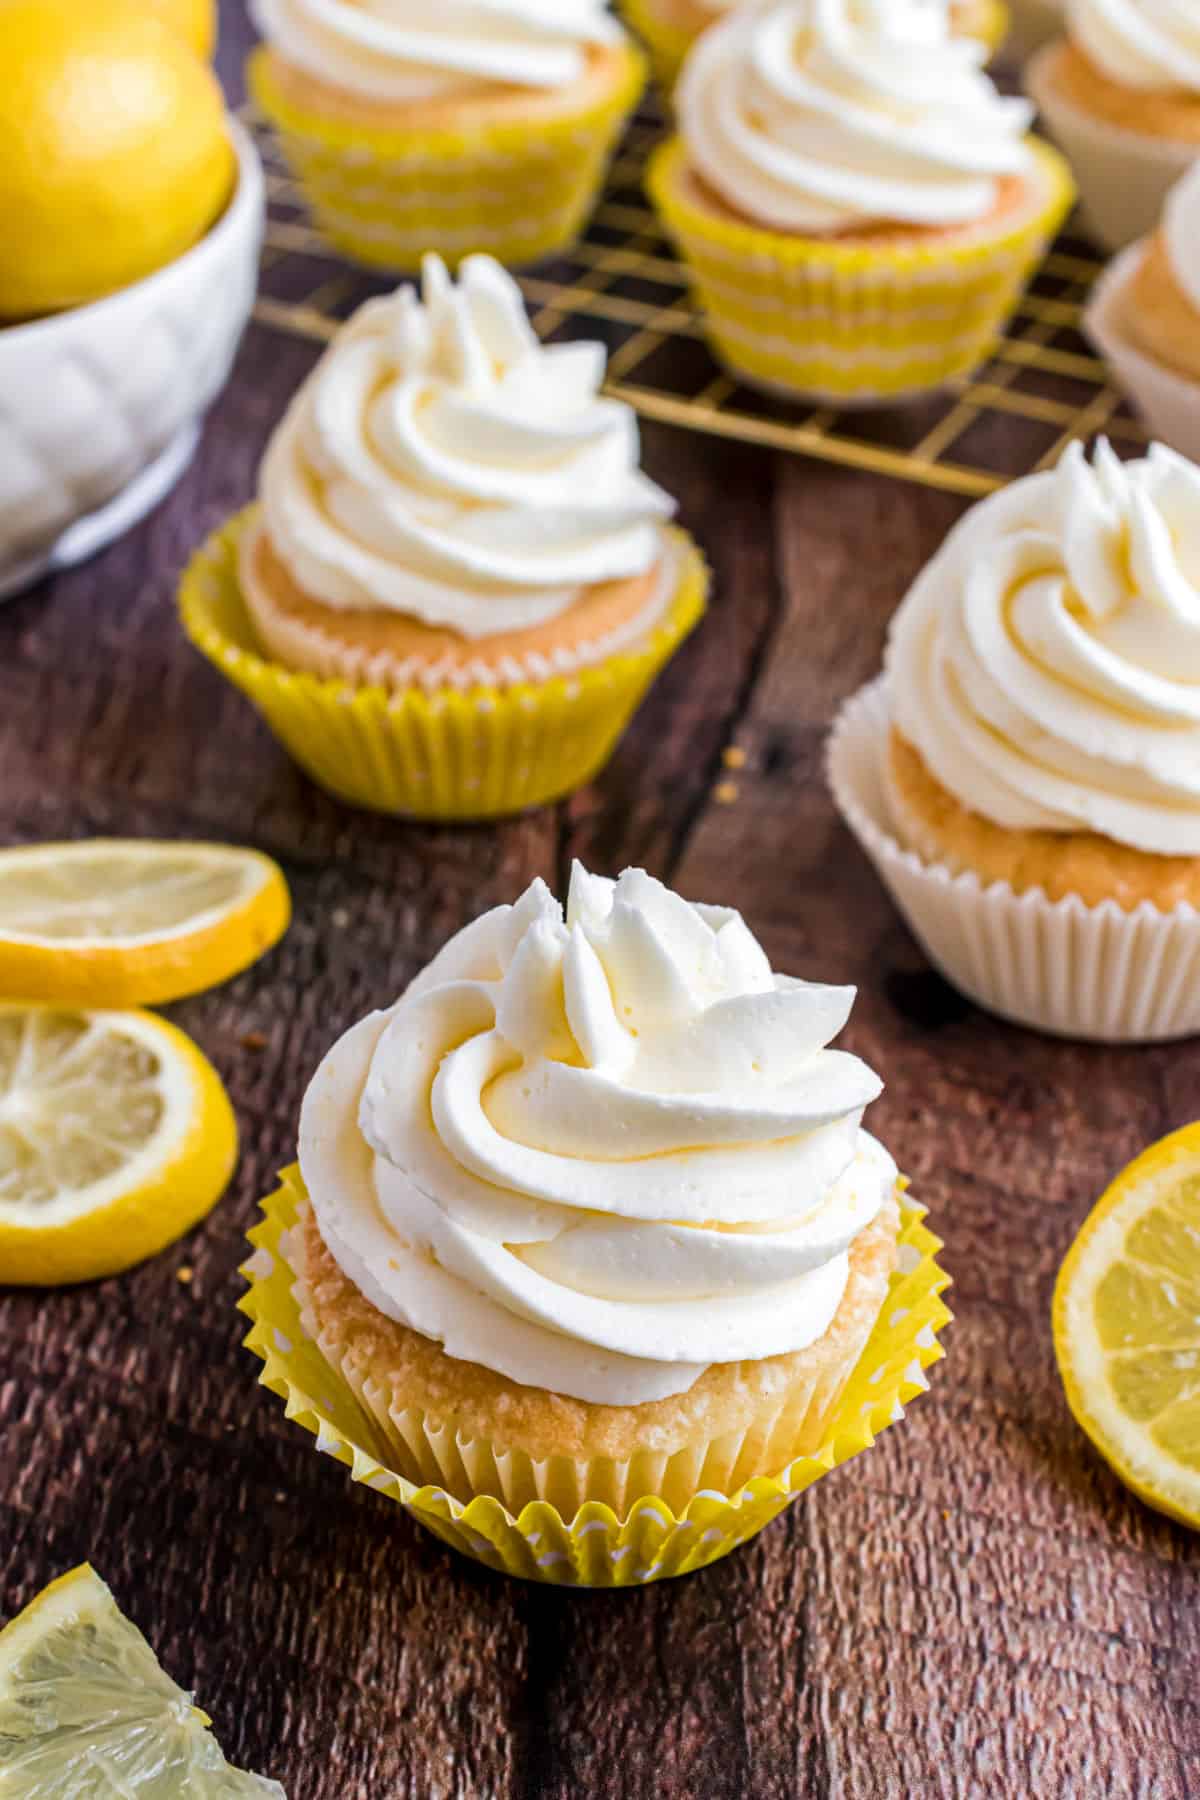 Lemon frosted cupcakes on a wooden board.